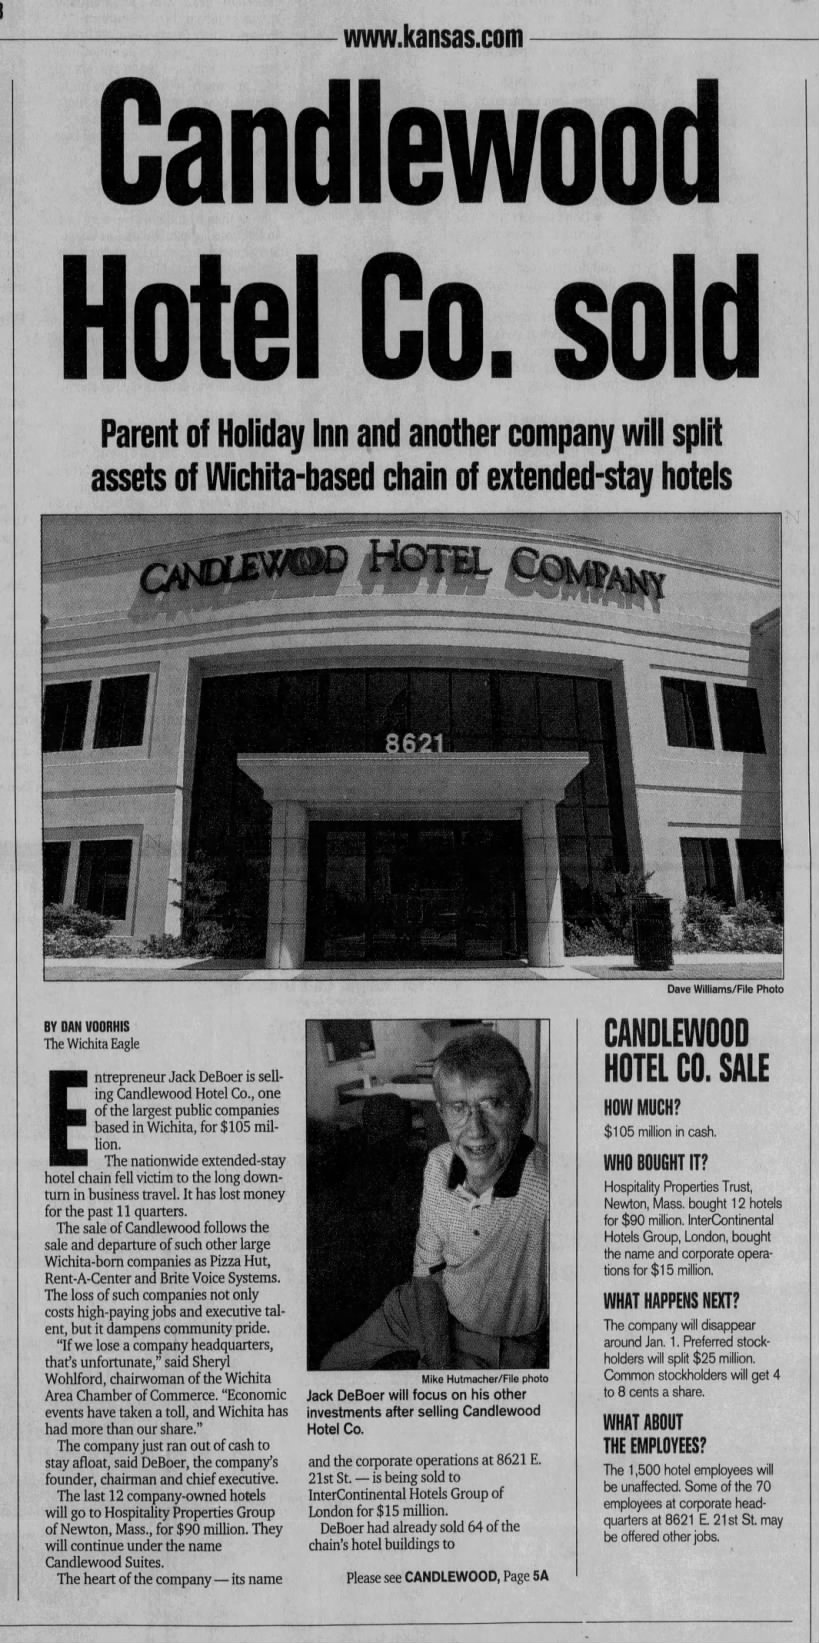 Candlewood Hotel Co. sold